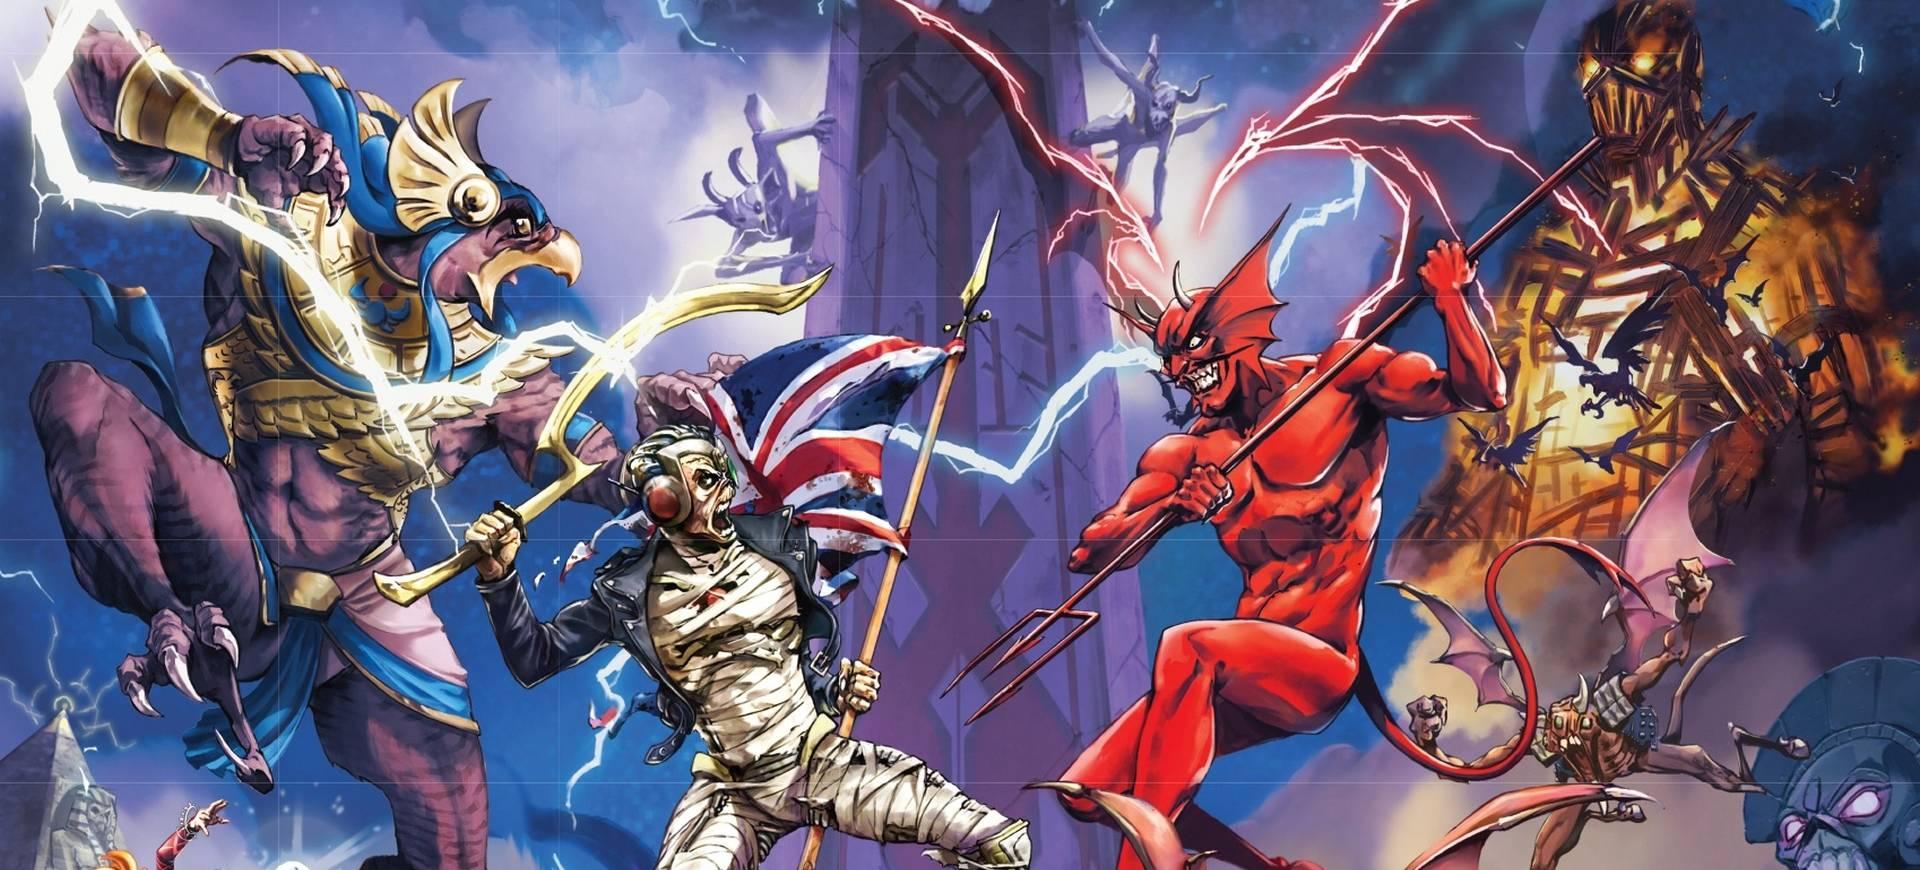 Iron Maiden tung trailer game ‘Legacy of the Beast’ - Tin Game Mobile